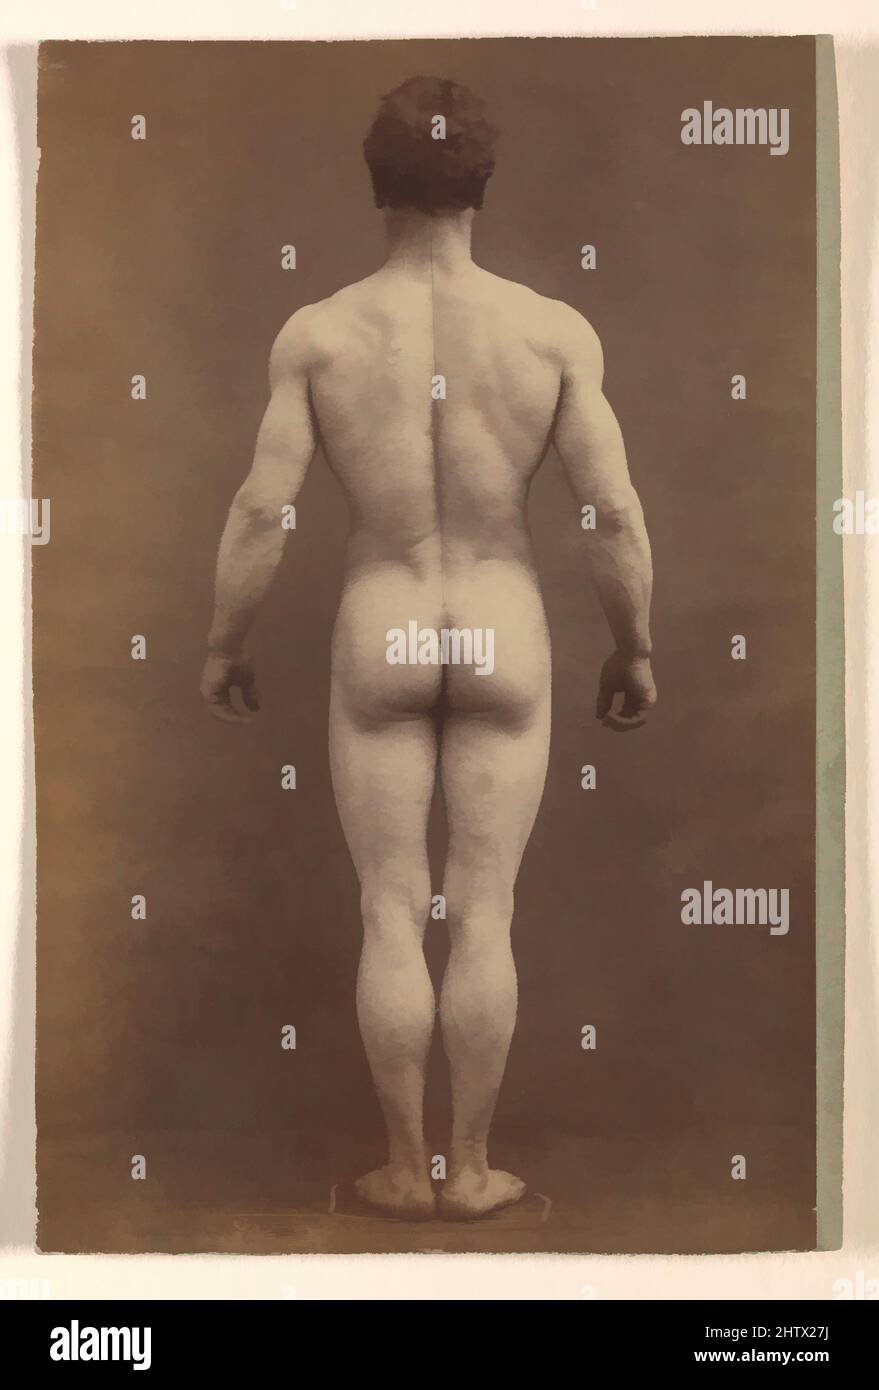 Art inspired by Male Musculature Study, ca. 1890, Albumen silver print, Image: 14.9 x 9.6 cm (5 7/8 x 3 3/4 in.), Photographs, Albert Londe (French, 1858–1917), Paul Marie Louis Pierre Richer (French, 1849–1933), Author of a treatise on the importance of the camera in medical practice, Classic works modernized by Artotop with a splash of modernity. Shapes, color and value, eye-catching visual impact on art. Emotions through freedom of artworks in a contemporary way. A timeless message pursuing a wildly creative new direction. Artists turning to the digital medium and creating the Artotop NFT Stock Photo